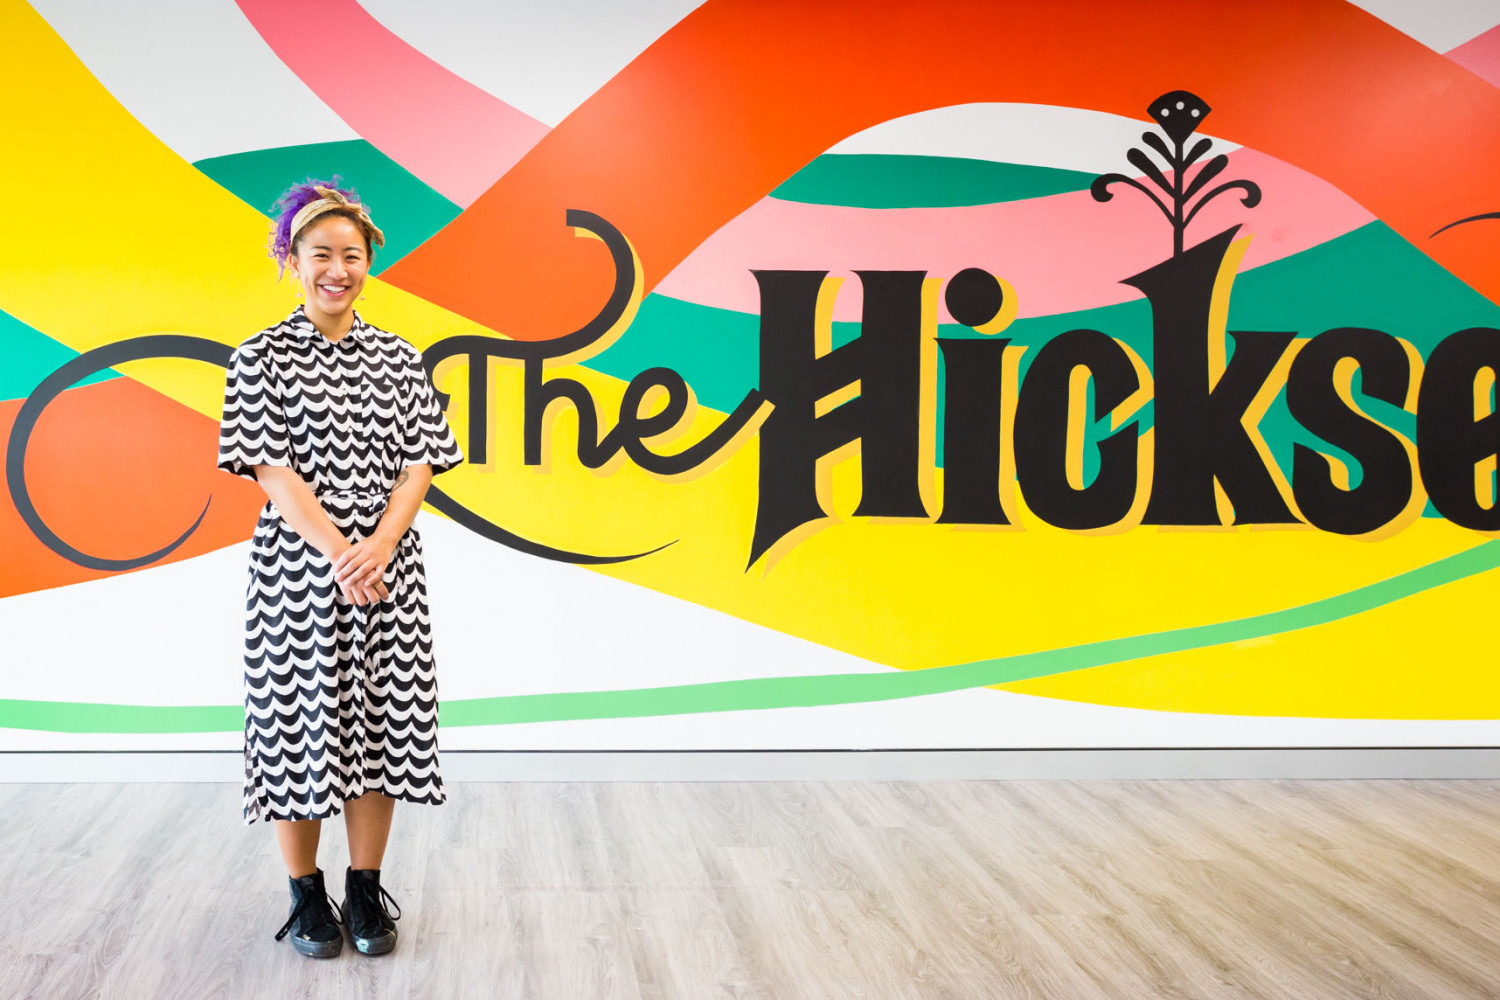 Angelica Catalan, The Hickson, 2021. Commission for temporary office space in Barangaroo